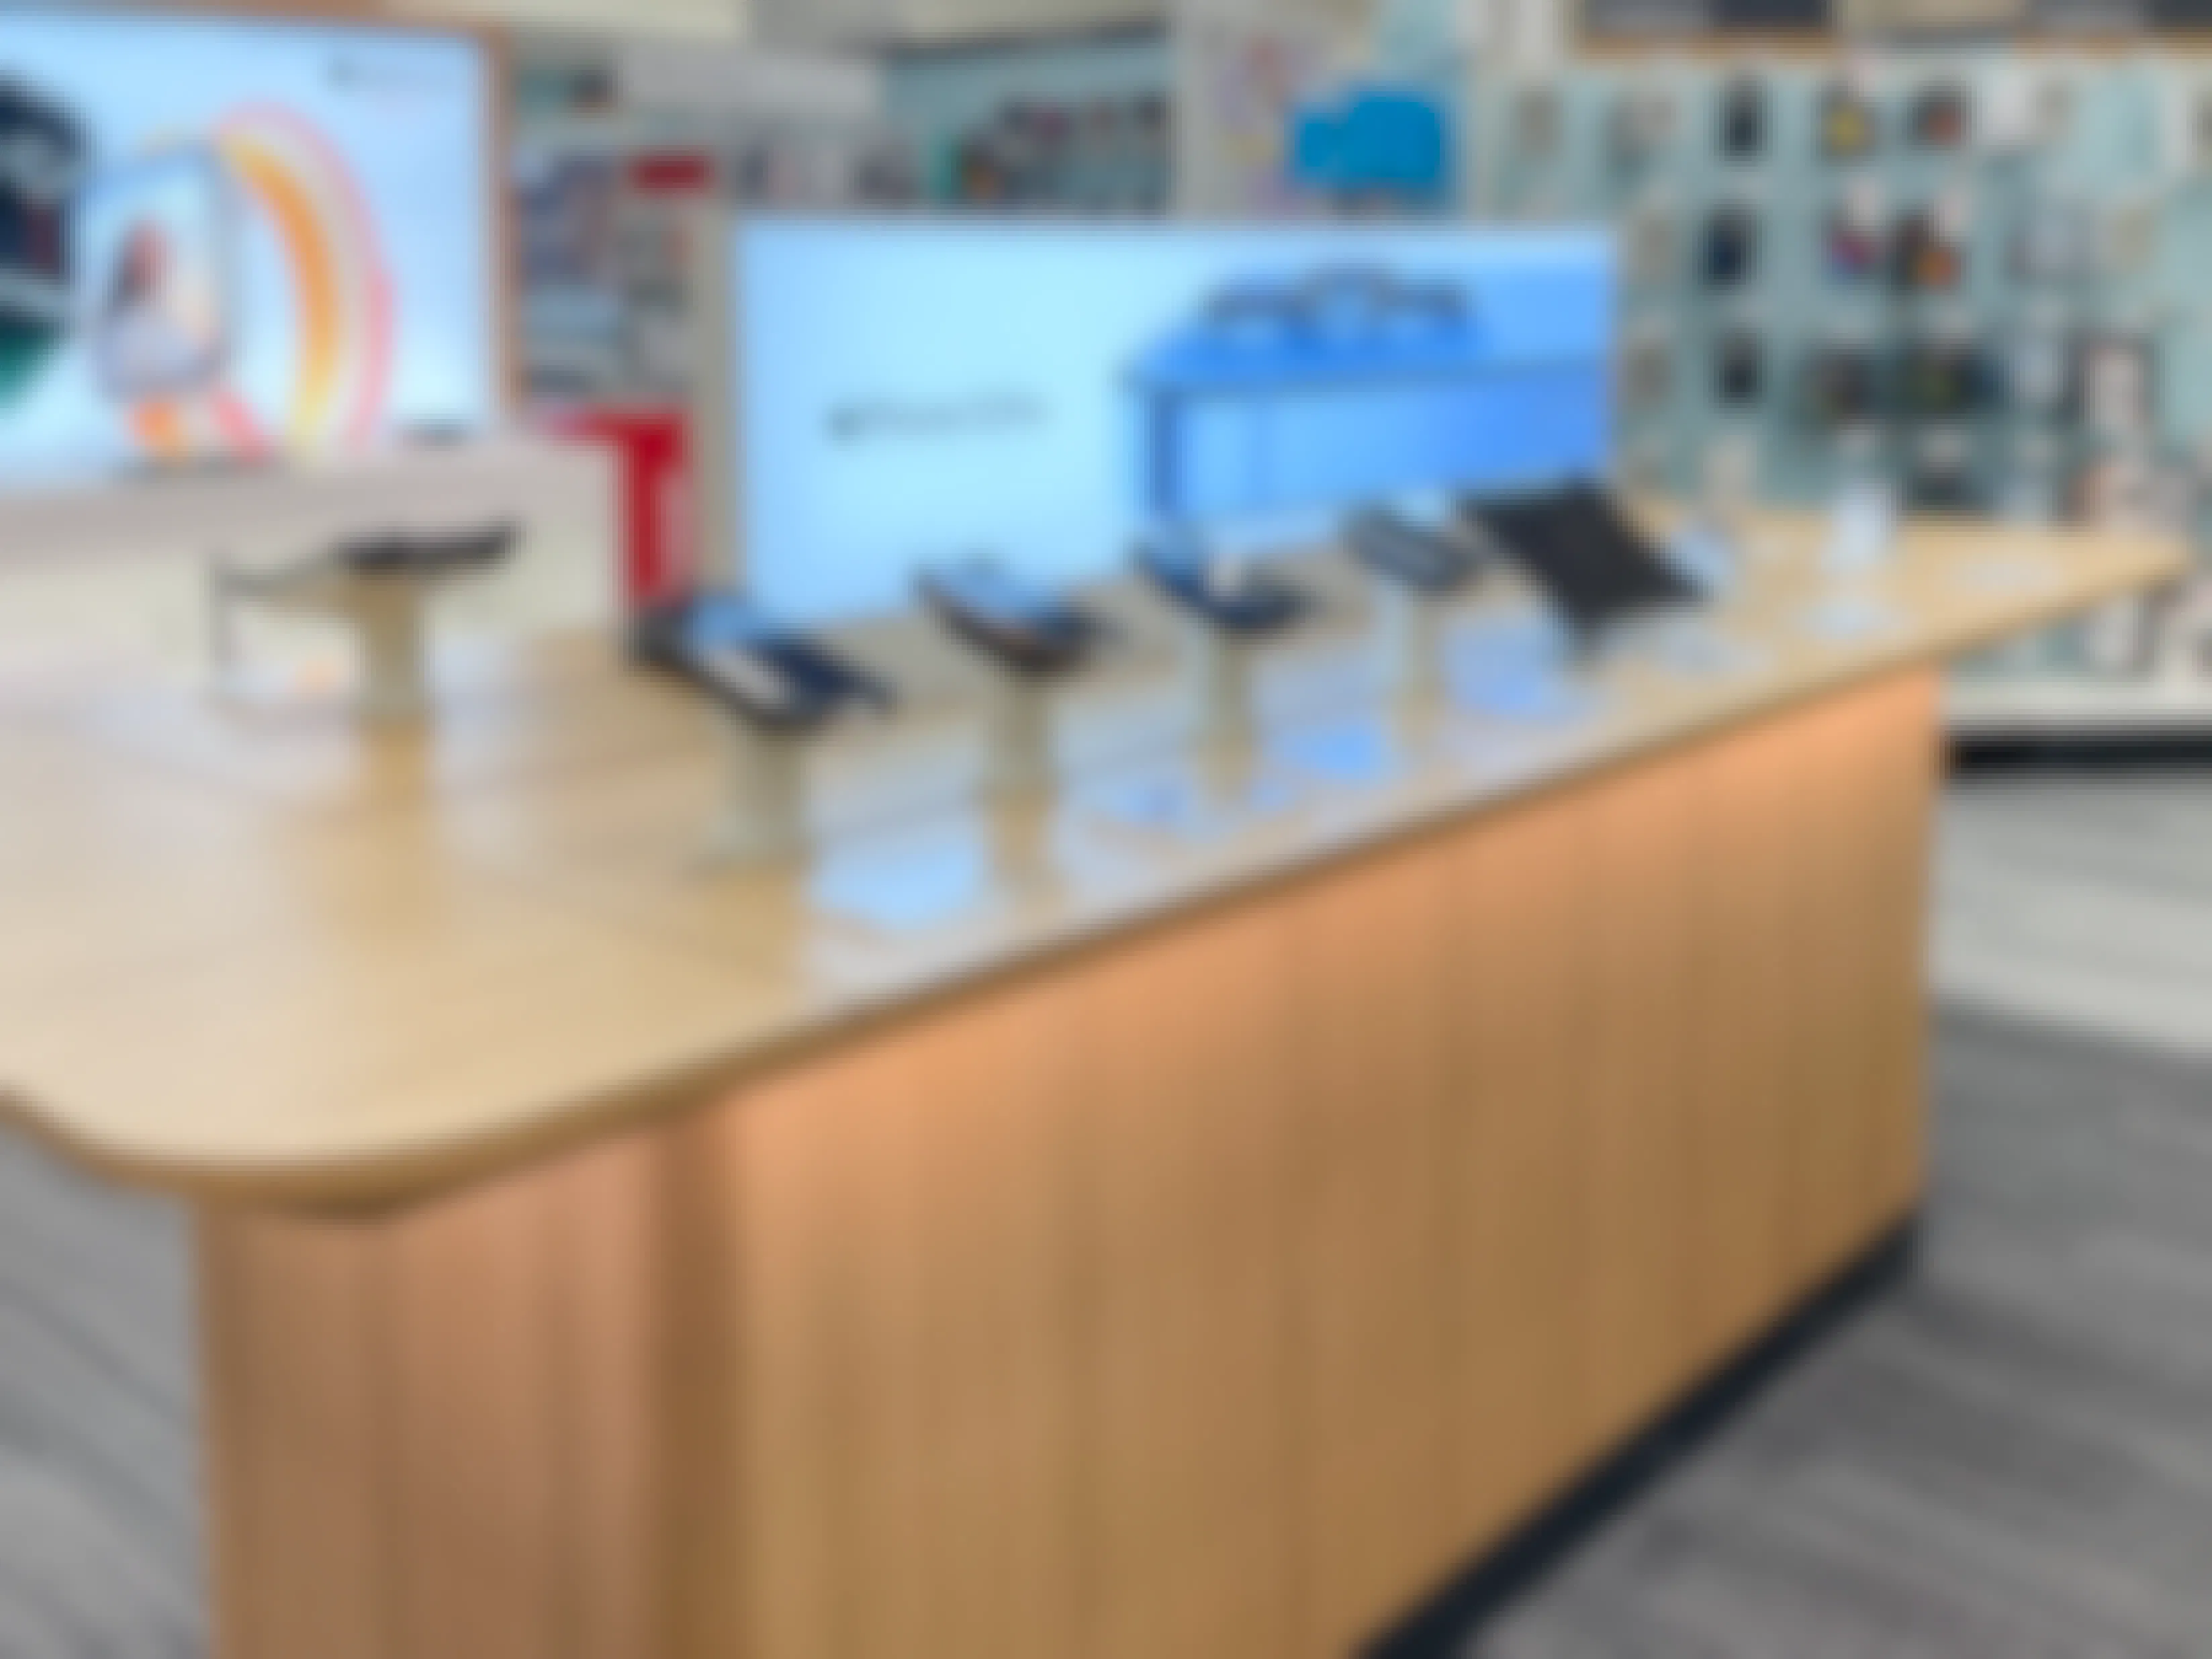 More Mini Apple Stores Are Opening in Target Before the Holidays. Got One?